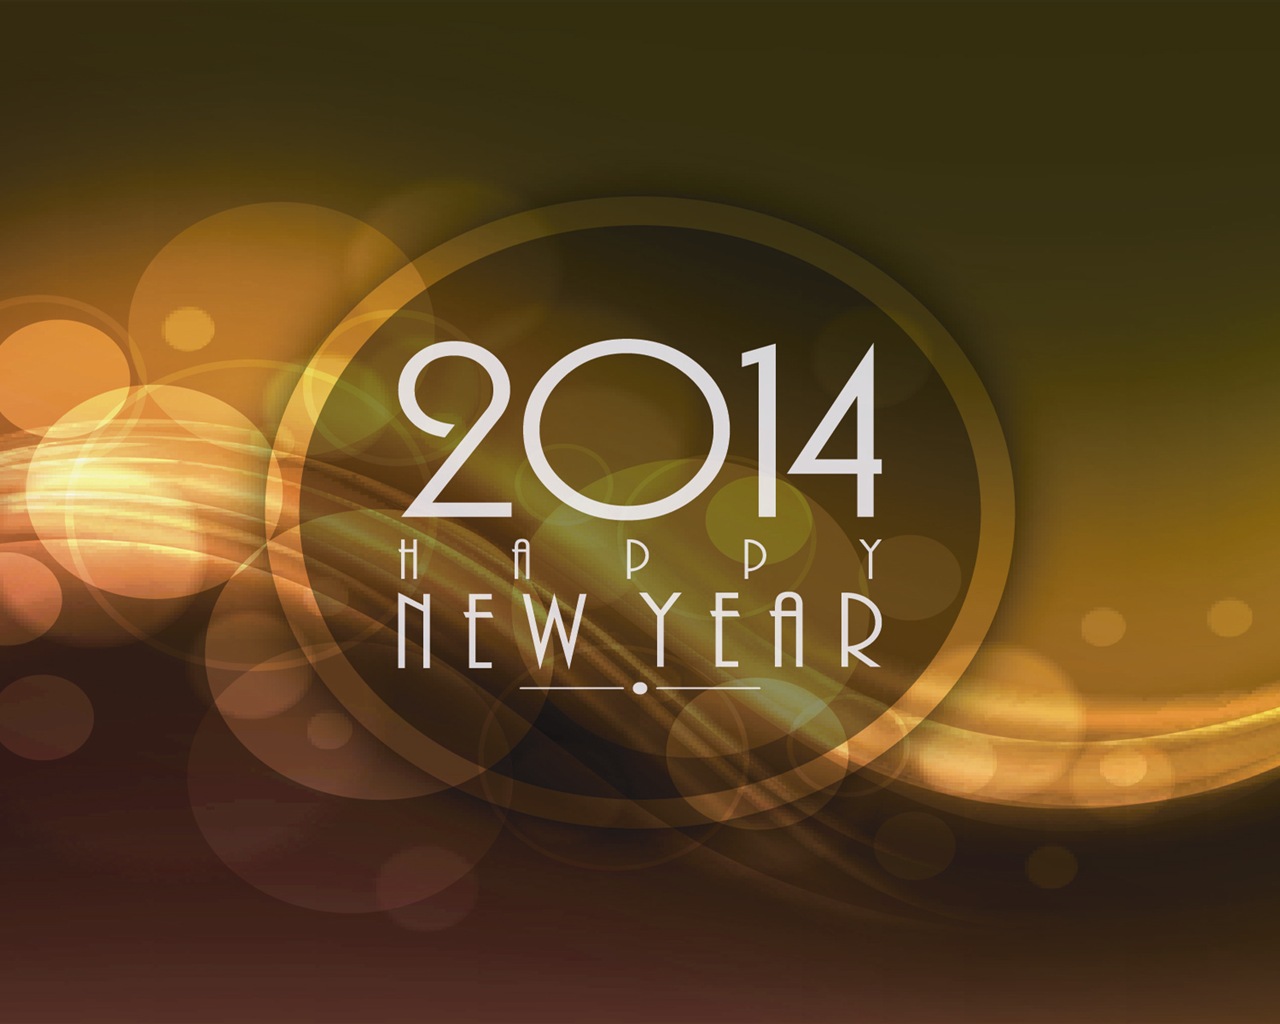 2014 New Year Theme HD Wallpapers (1) #4 - 1280x1024